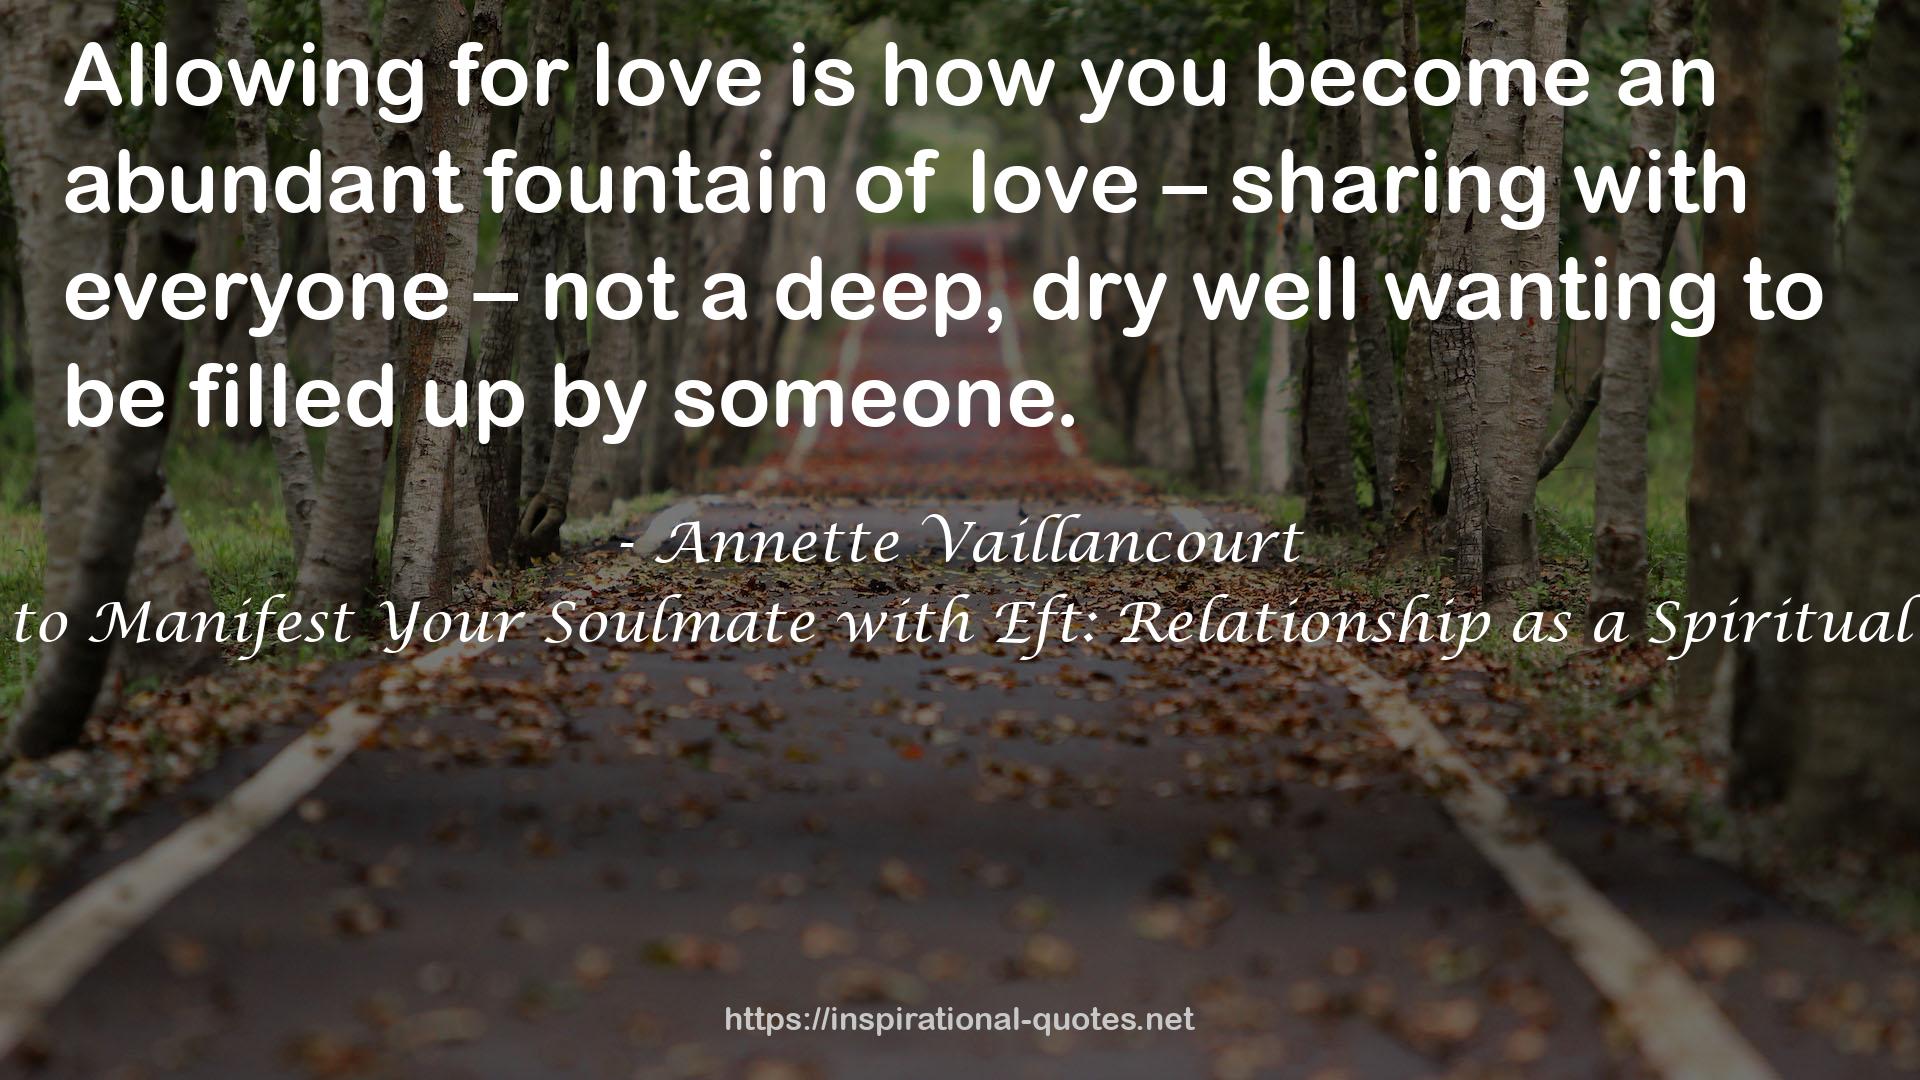 How to Manifest Your Soulmate with Eft: Relationship as a Spiritual Path QUOTES